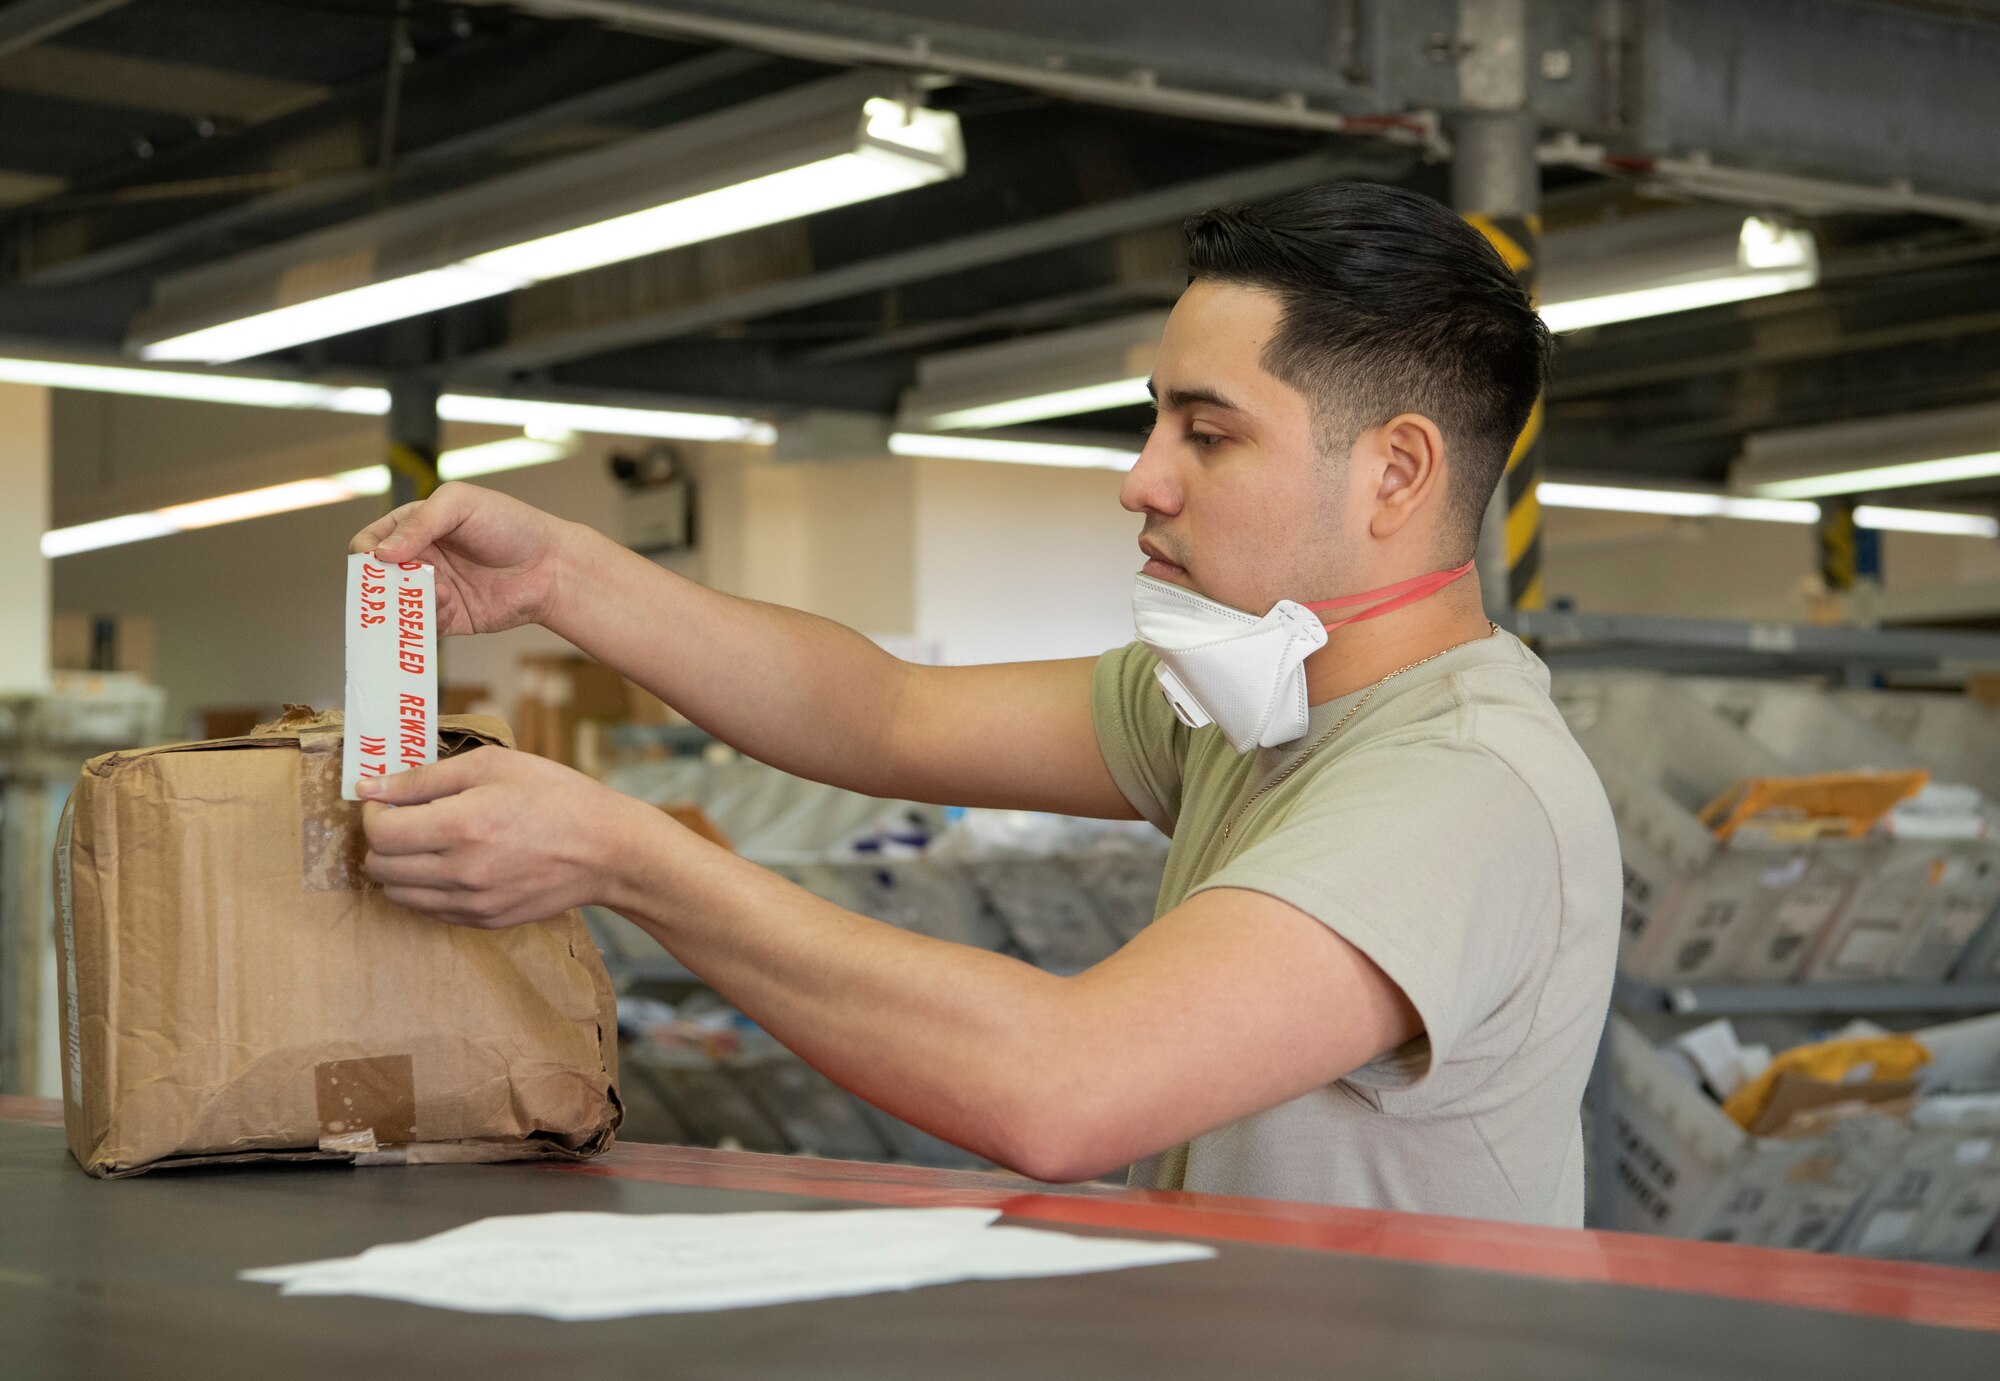 Despite the COVID-19 pandemic, packages continue to arrive daily to Spangdahlem AB and members of the base can still receive mail.